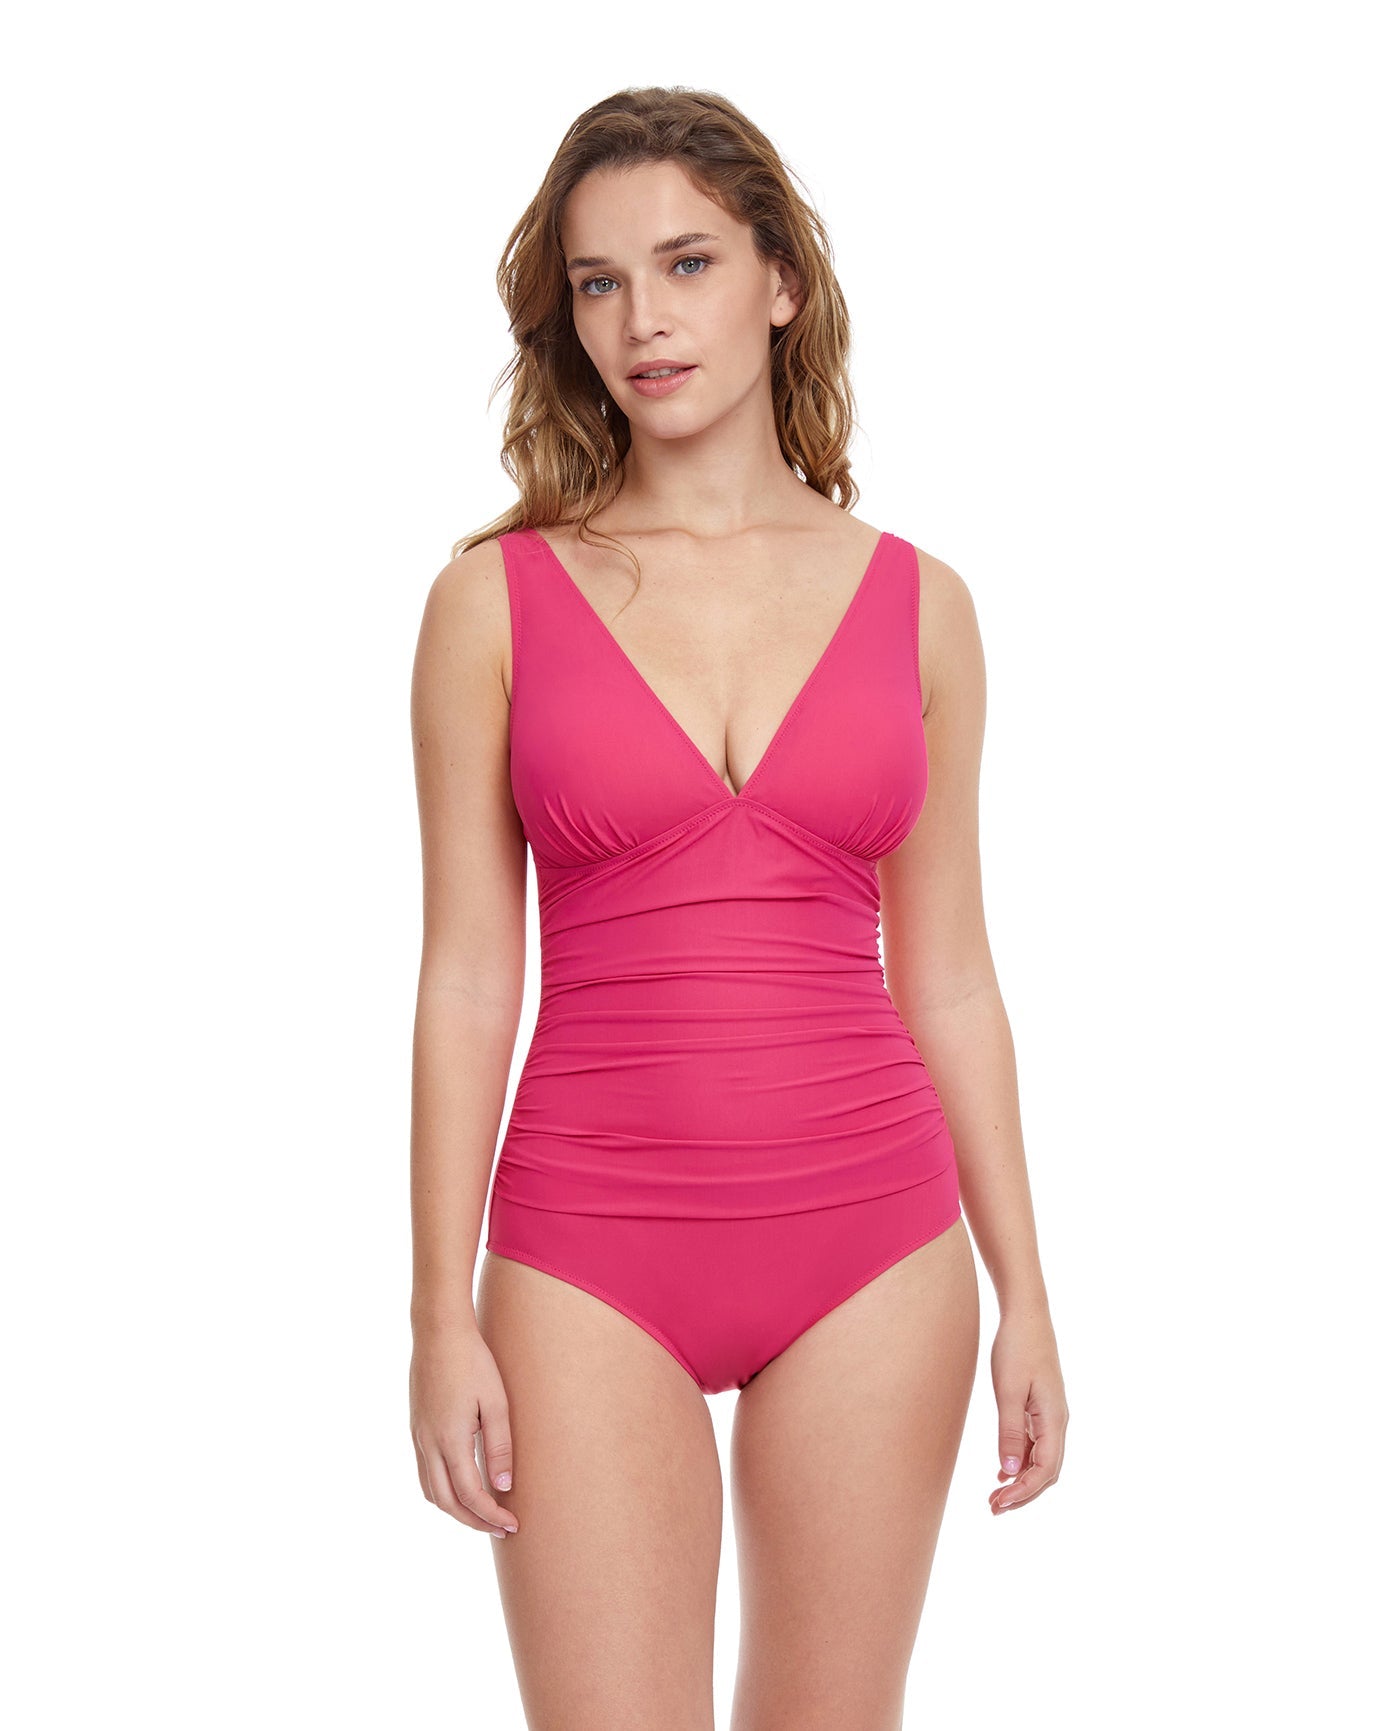 Athletic High Cut Mesh Panel Zip Front One Piece Swimsuit – Rose